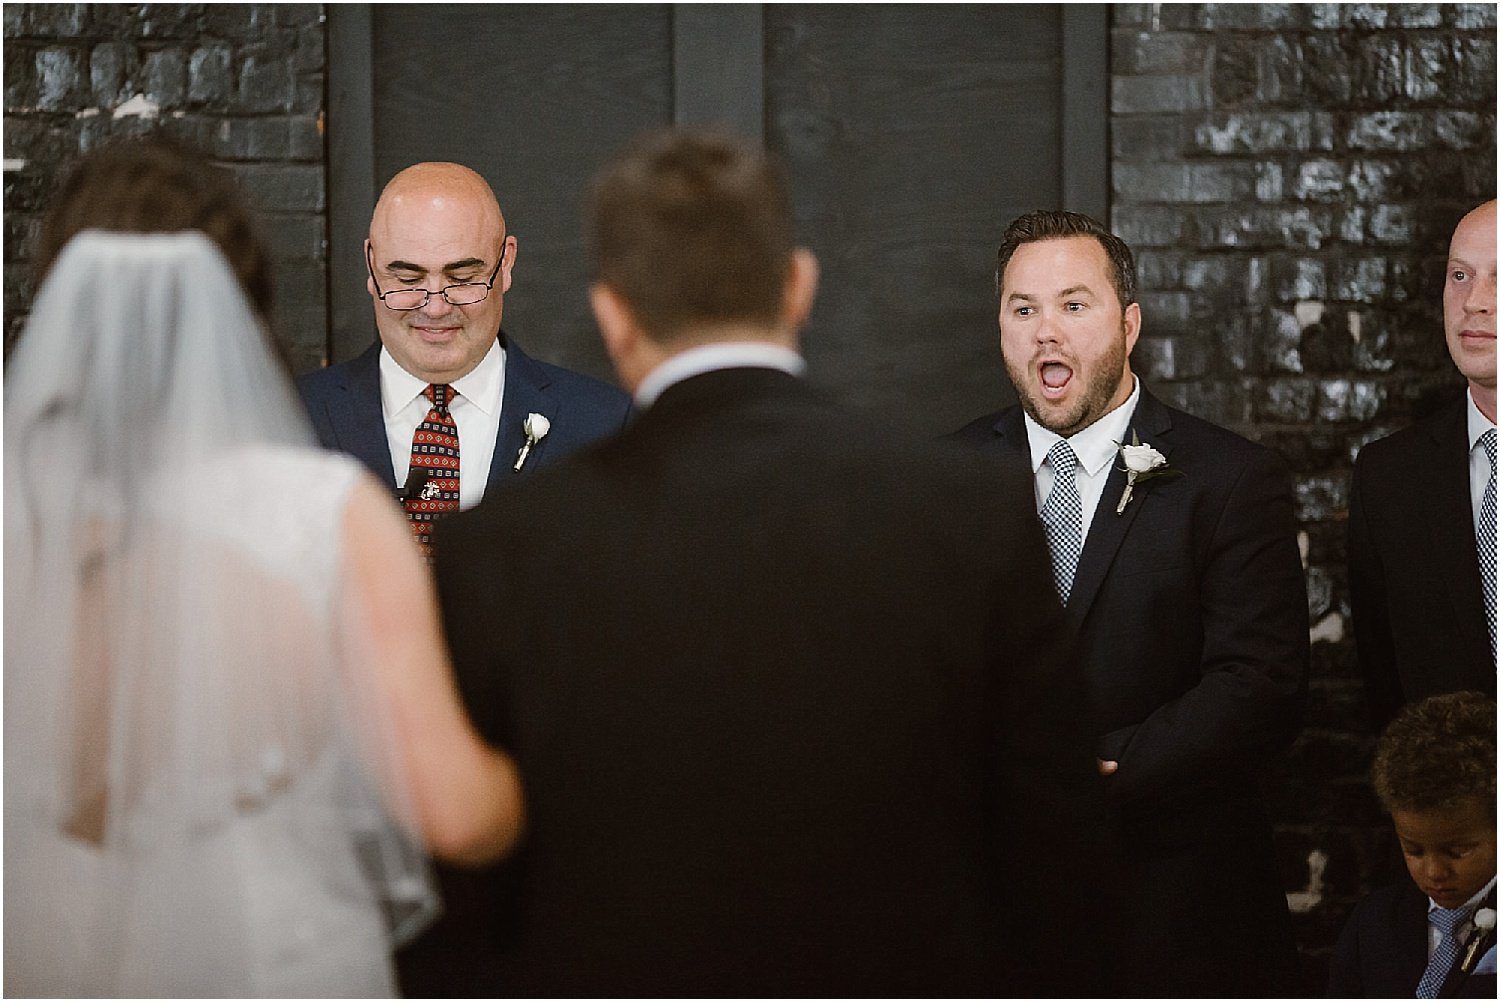 Groom's Reaction to Bride Walking Down the Aisle